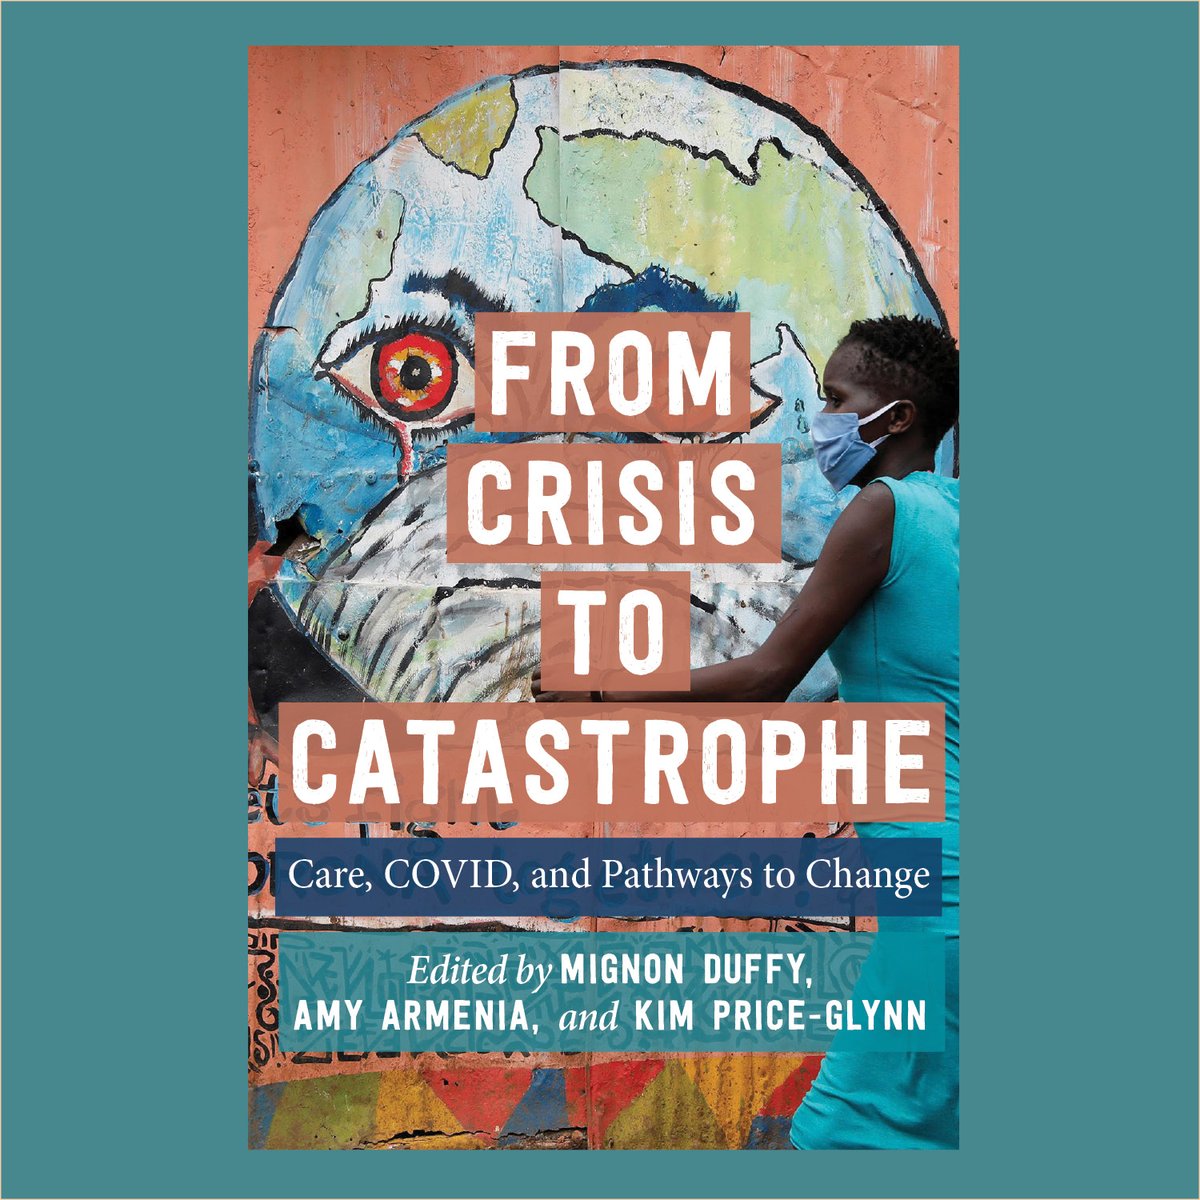 “From Crisis to Catastrophe: Care, COVID, and Pathways to Change”
Edited by Mignon Duffy, Amy Armenia, and Kim Price-Glynn

rutgersuniversitypress.org/from-crisis-to…

#NewBookAnnouncement #SocialOrganization #PublicHealth